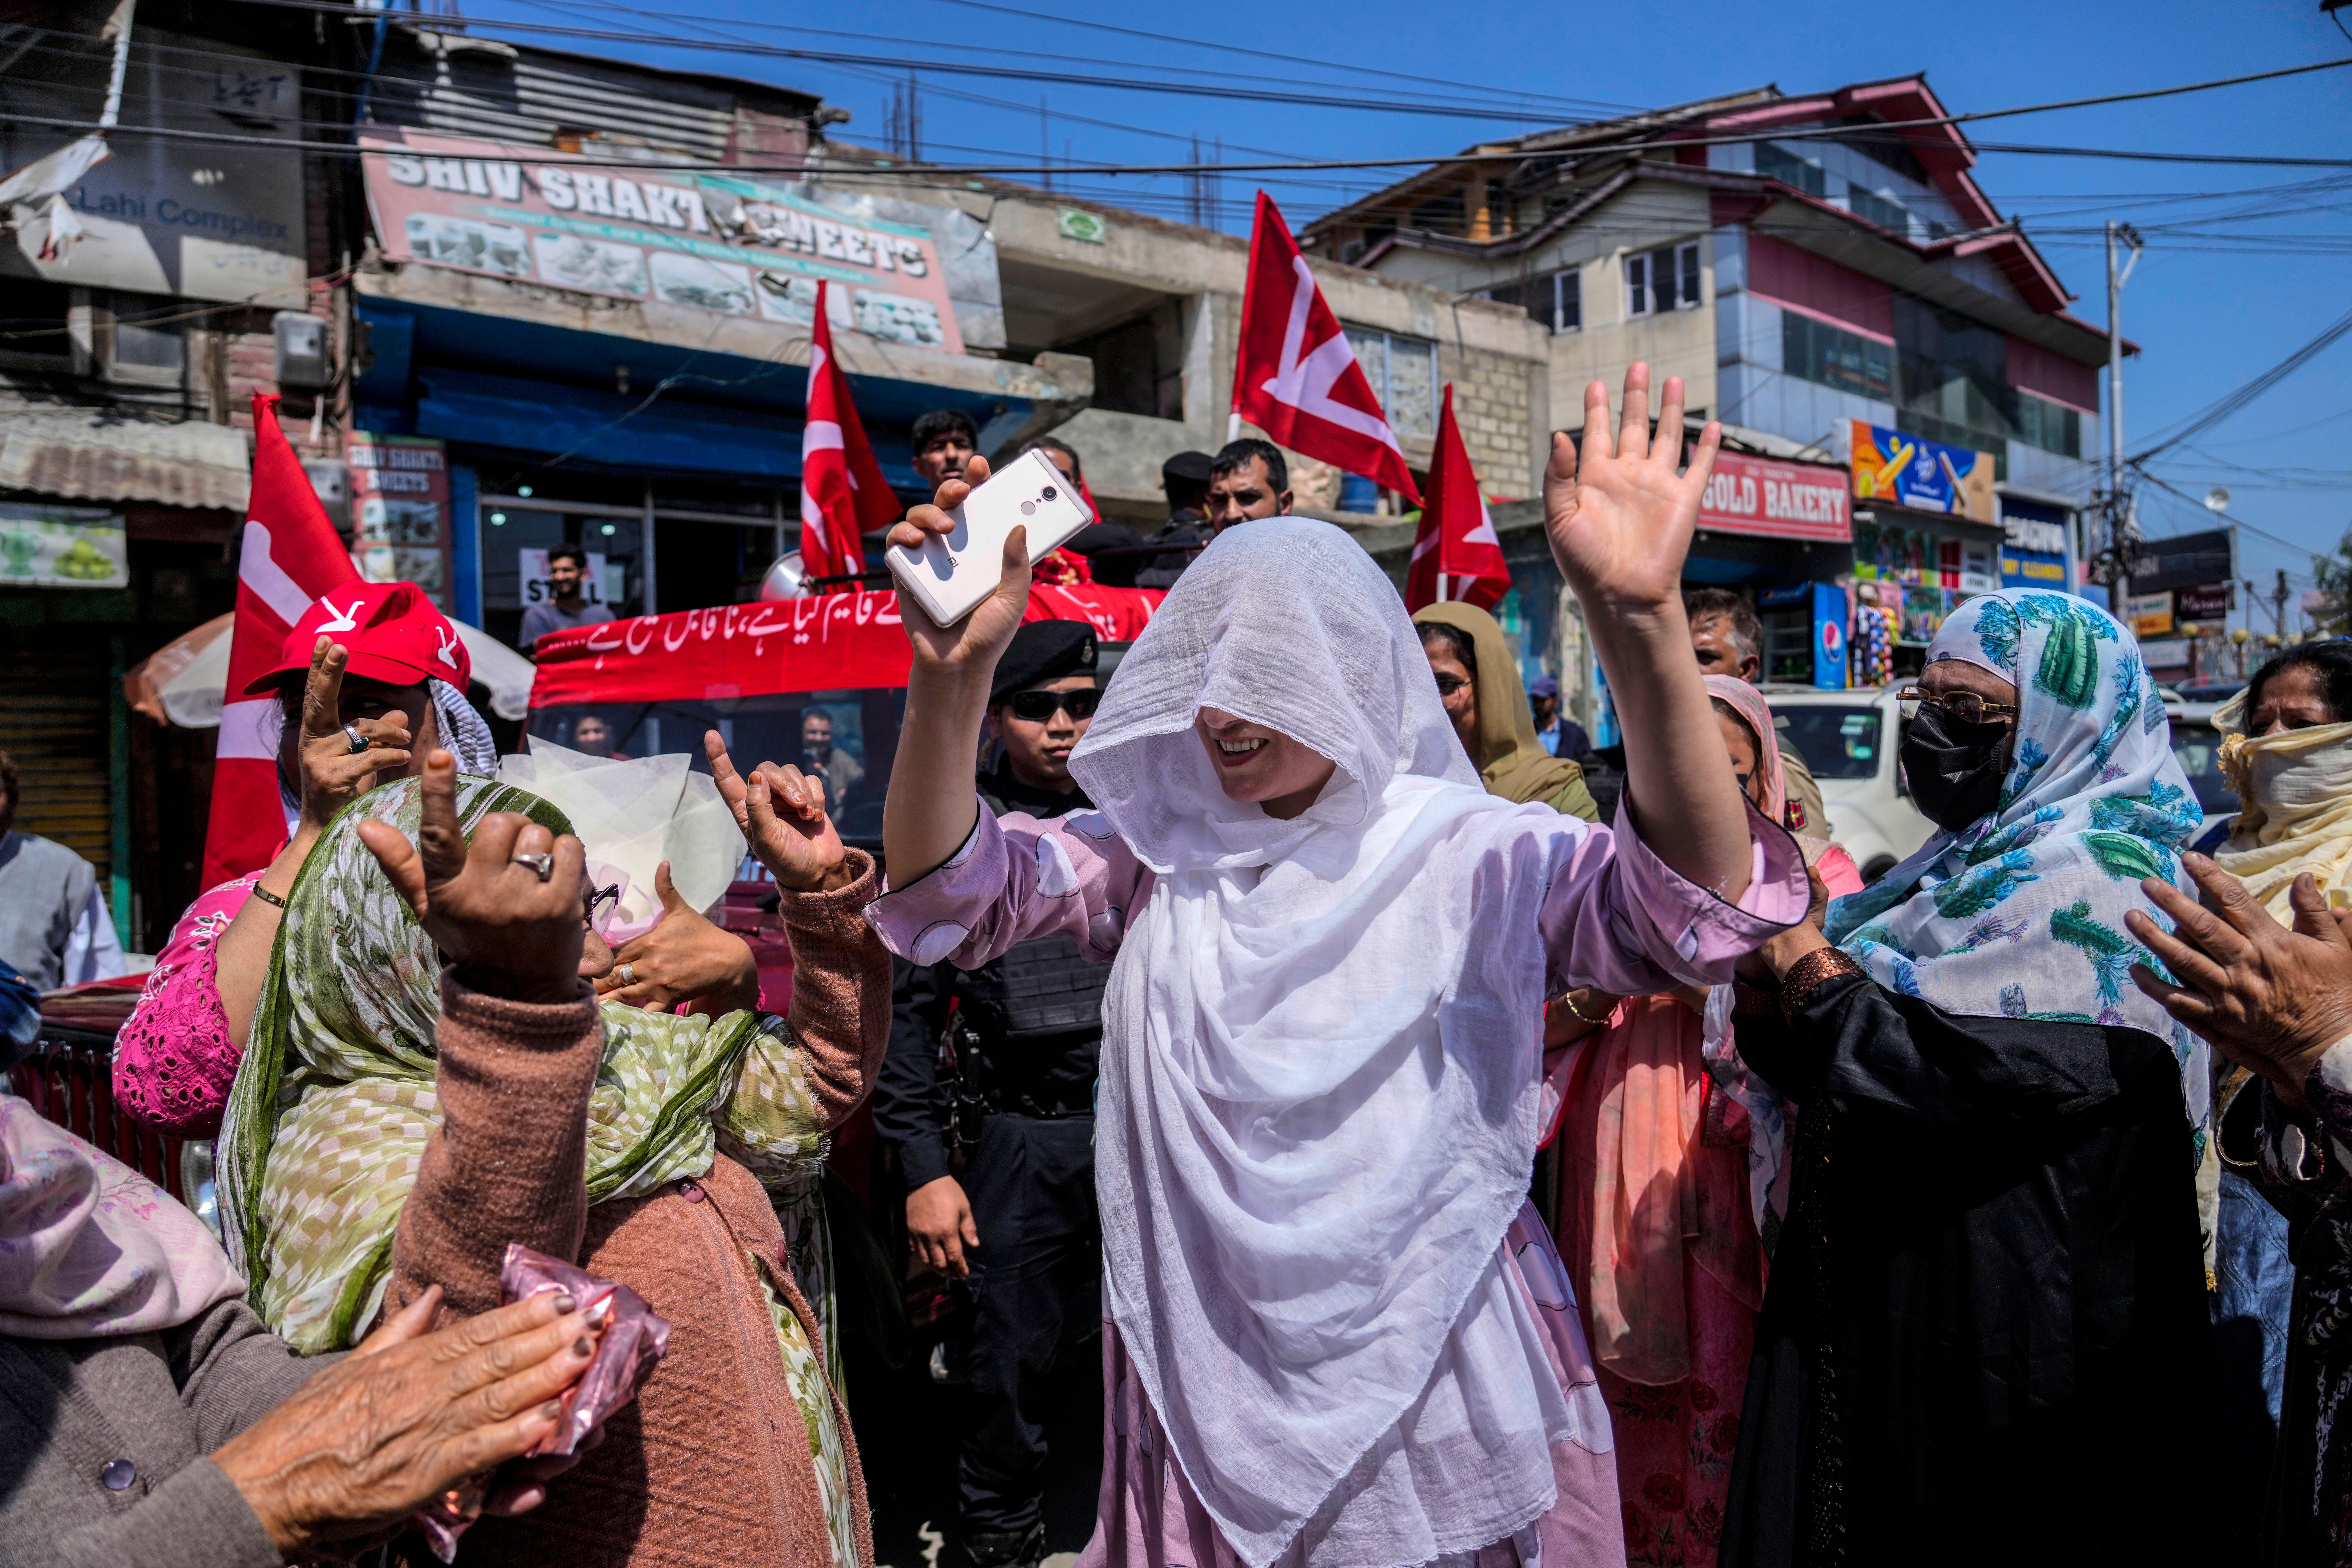 Supporters of National Conference party dance during an election rally in Srinagar, Kashmir